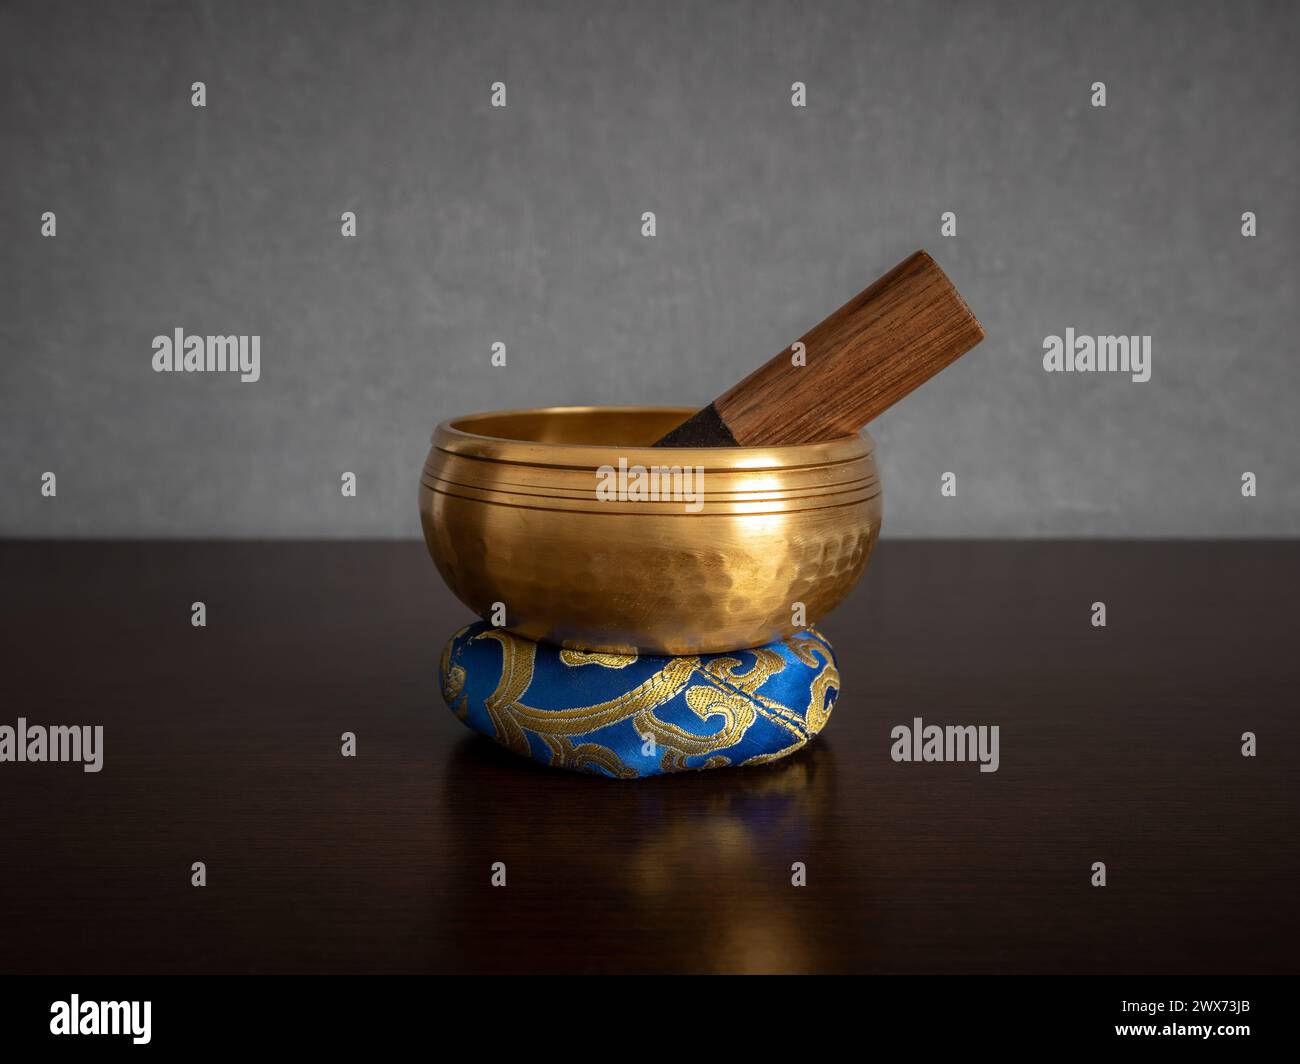 A golden colored Tibetan singing bowl with striker inside standing on a ring cushion placed in the center and isolated on a blurred clean background Stock Photo